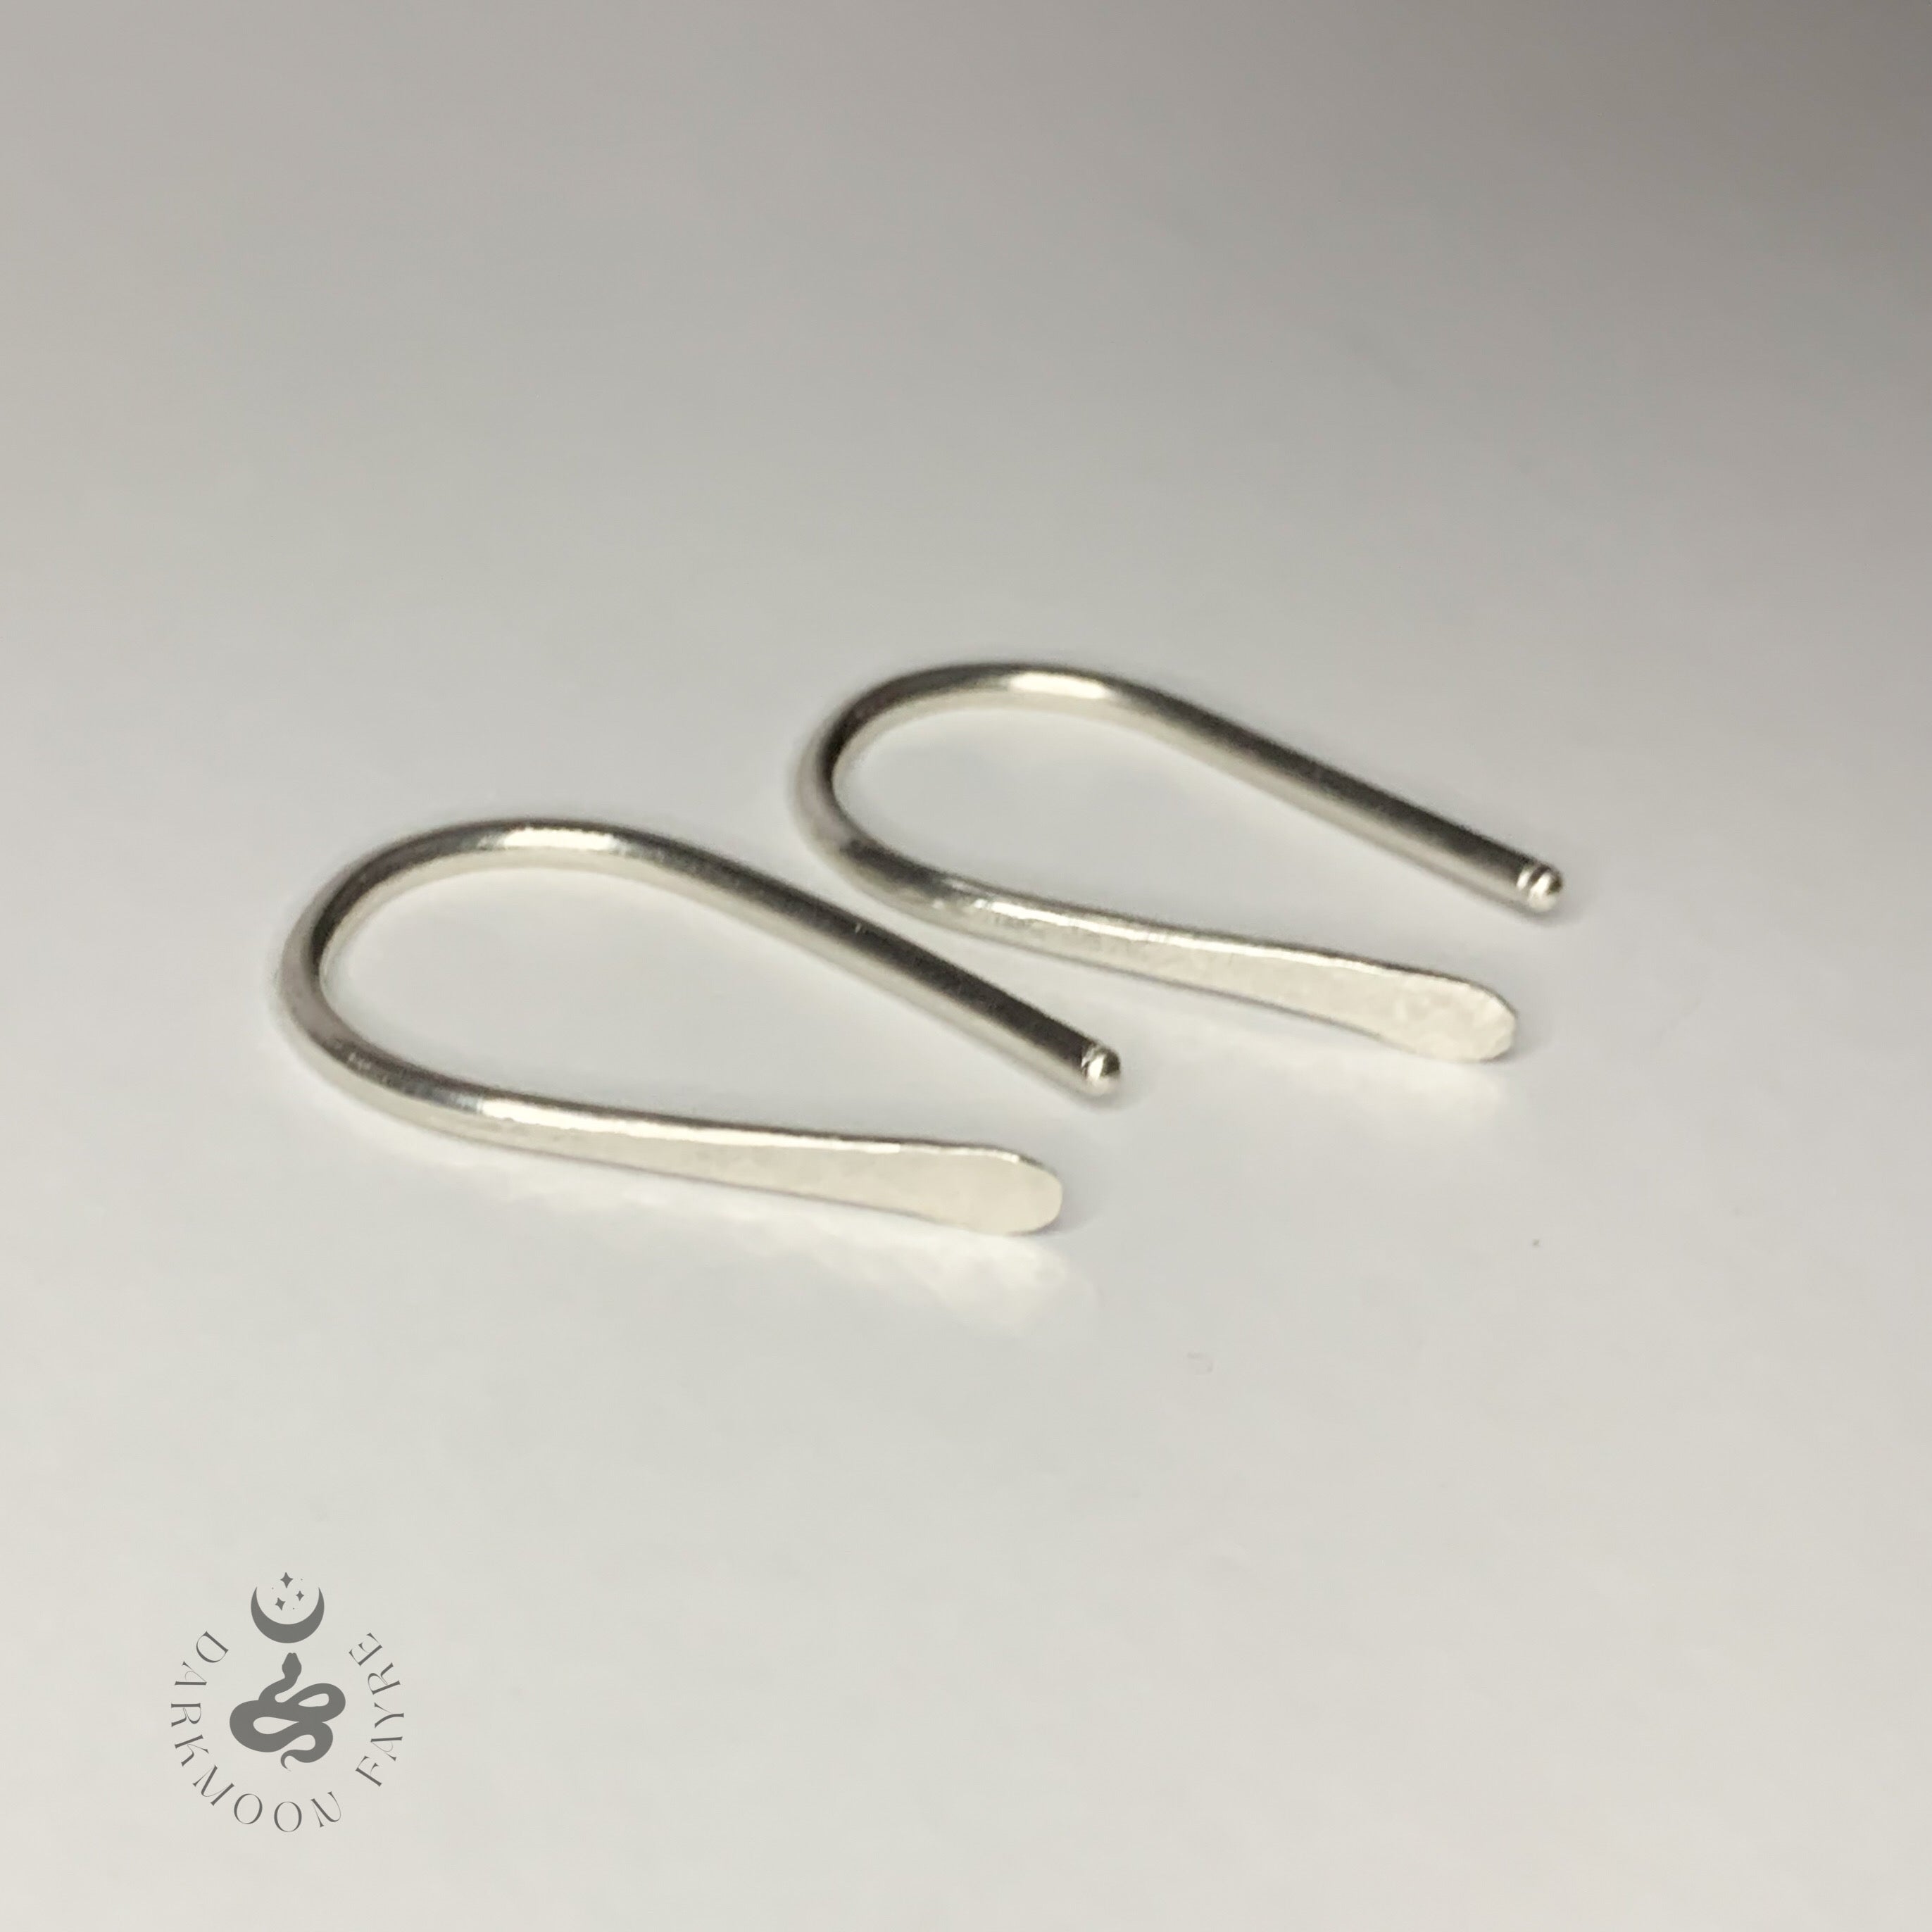 Silver Plated Kidney Shaped Ear Wires - Earring Findings To Make Jewelry  With, For Earrings -50 Pcs - Yahoo Shopping